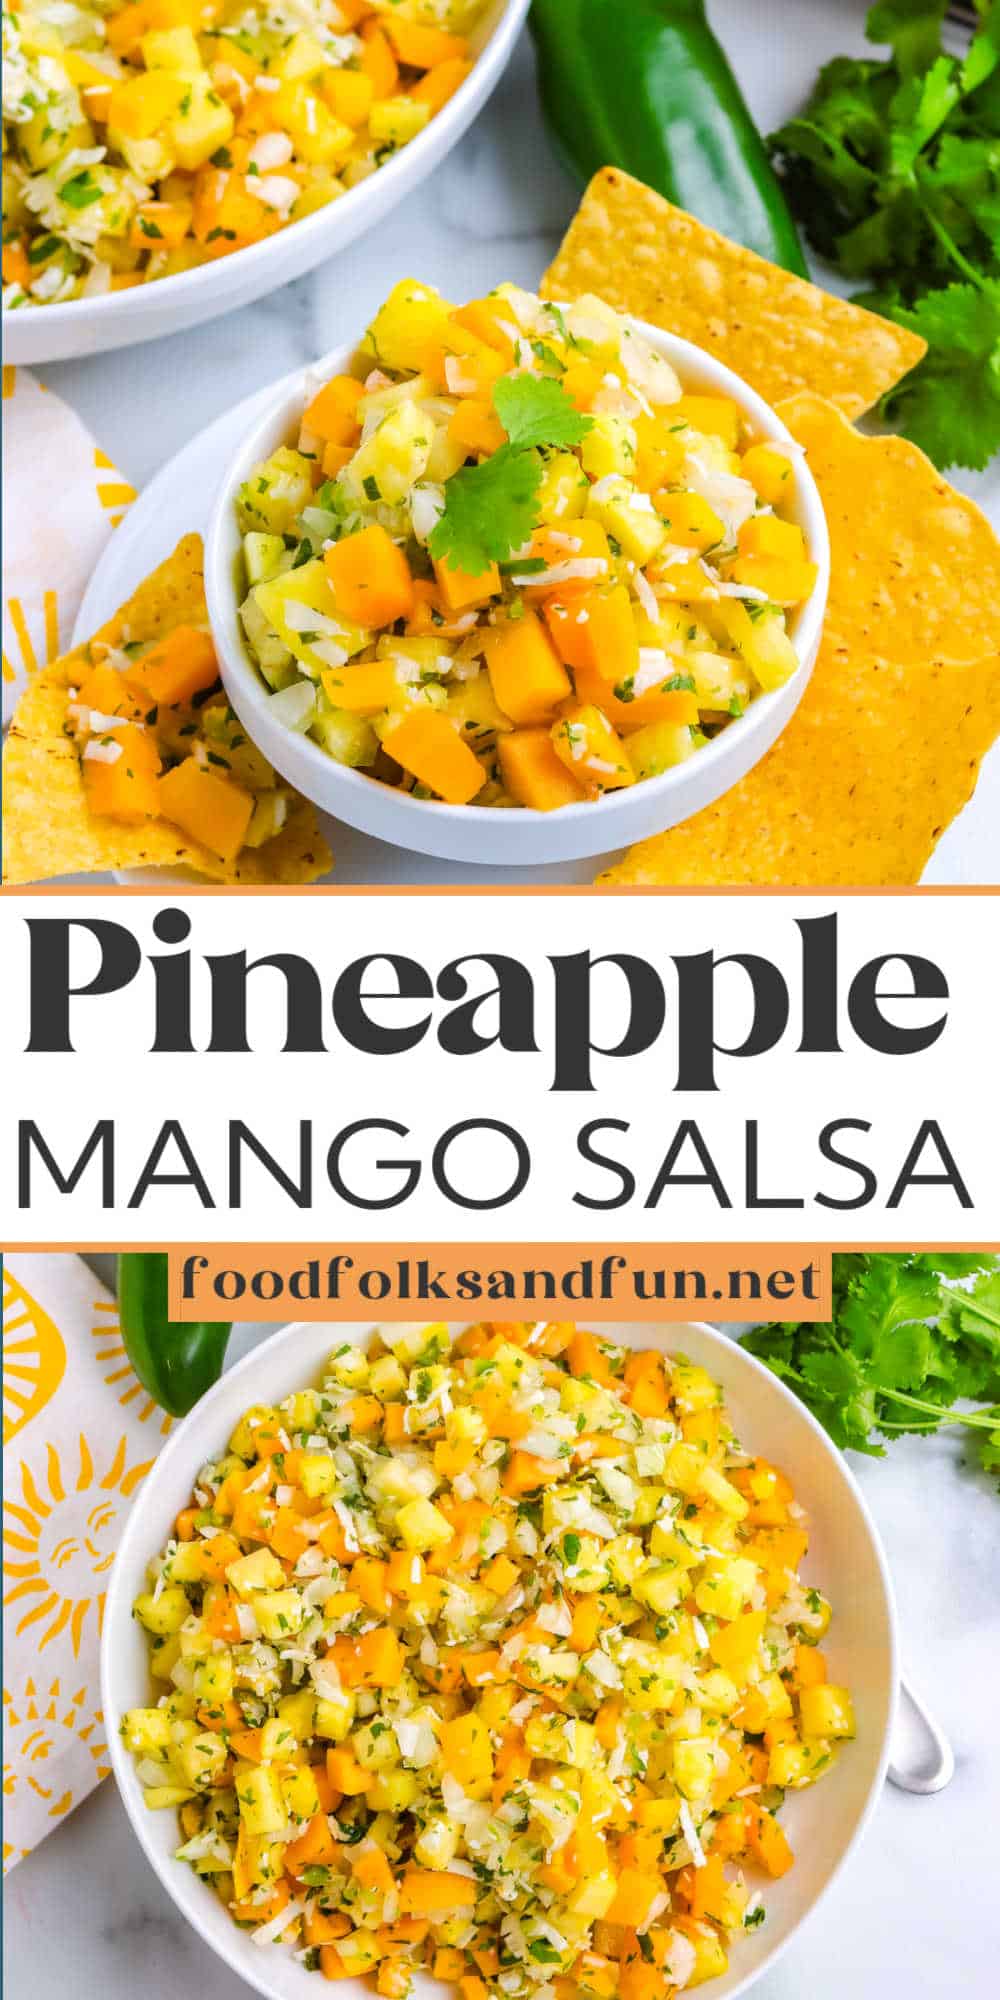 Pineapple Mango Salsa is a refreshing fruit salsa that goes well with various. The bright pineapple and mango are tasty with the spicy ginger and sweet coconut. via @foodfolksandfun